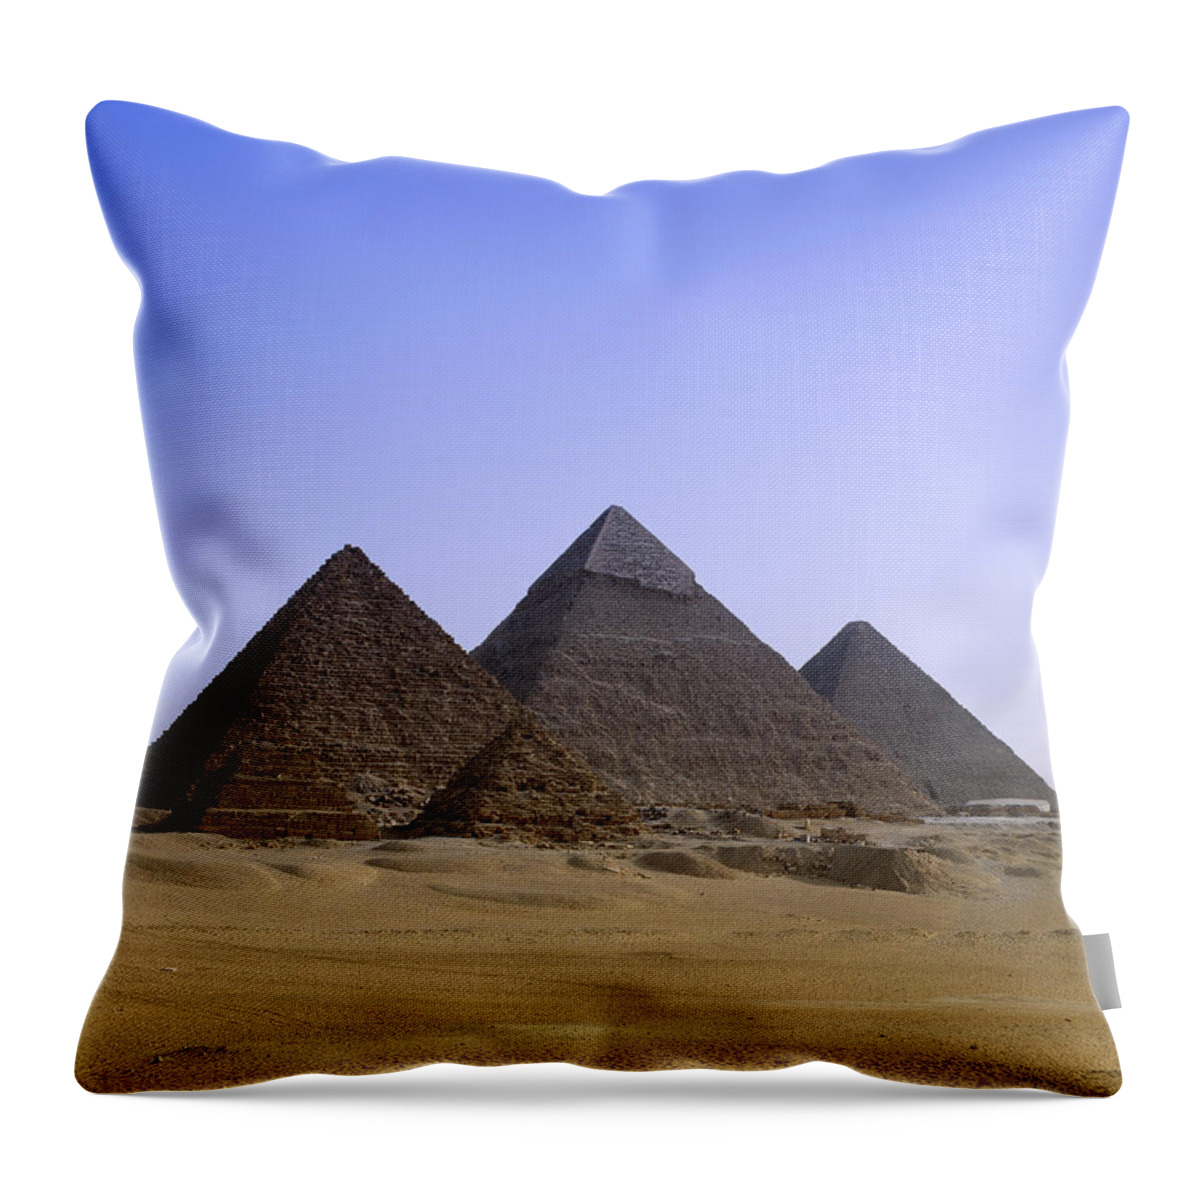 Clear Sky Throw Pillow featuring the photograph Pyramids In Desert Landscape, Close Up by Stephen Studd